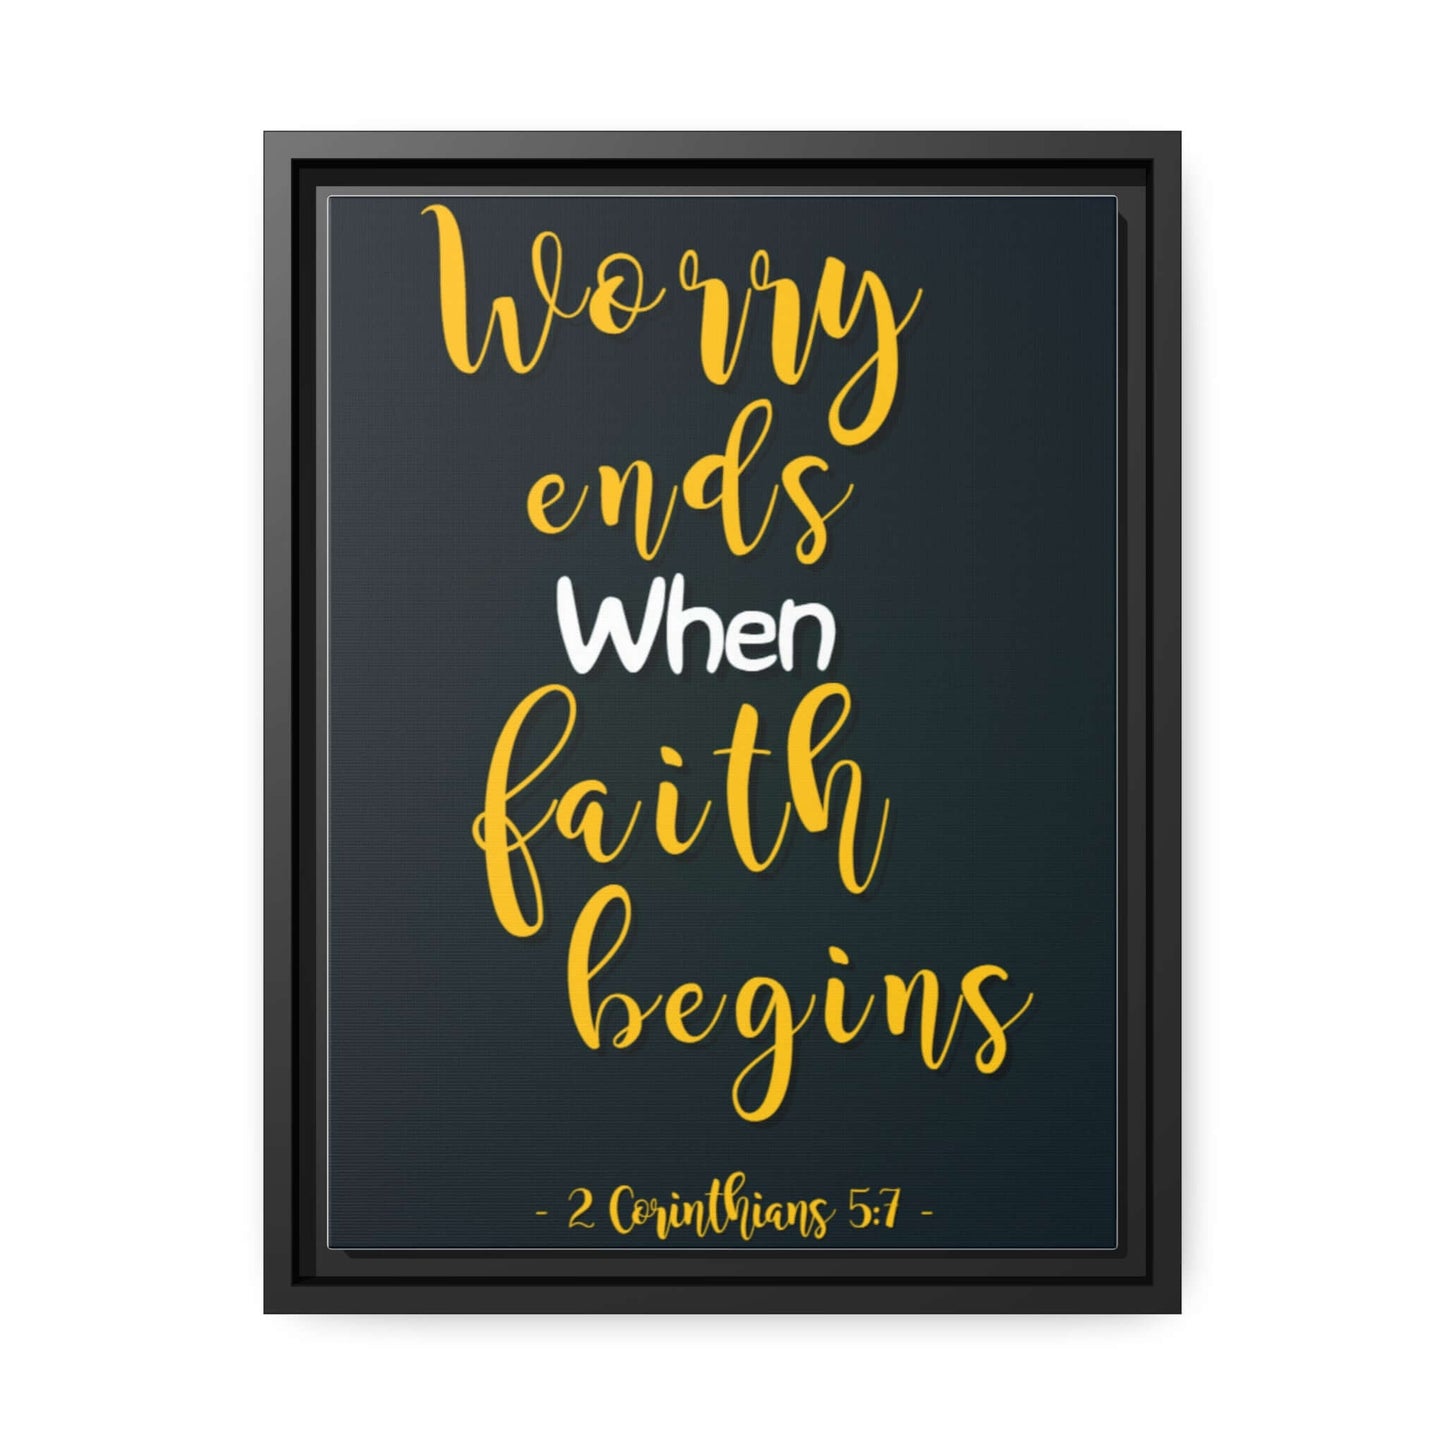 Elegant Wood Framed Canvas with Bible Verse - Multiple Sizes | Art & Wall Decor,Canvas,Decor,Eco-friendly,Framed,Hanging Hardware,Home & Living,Summer Picks,Sustainable